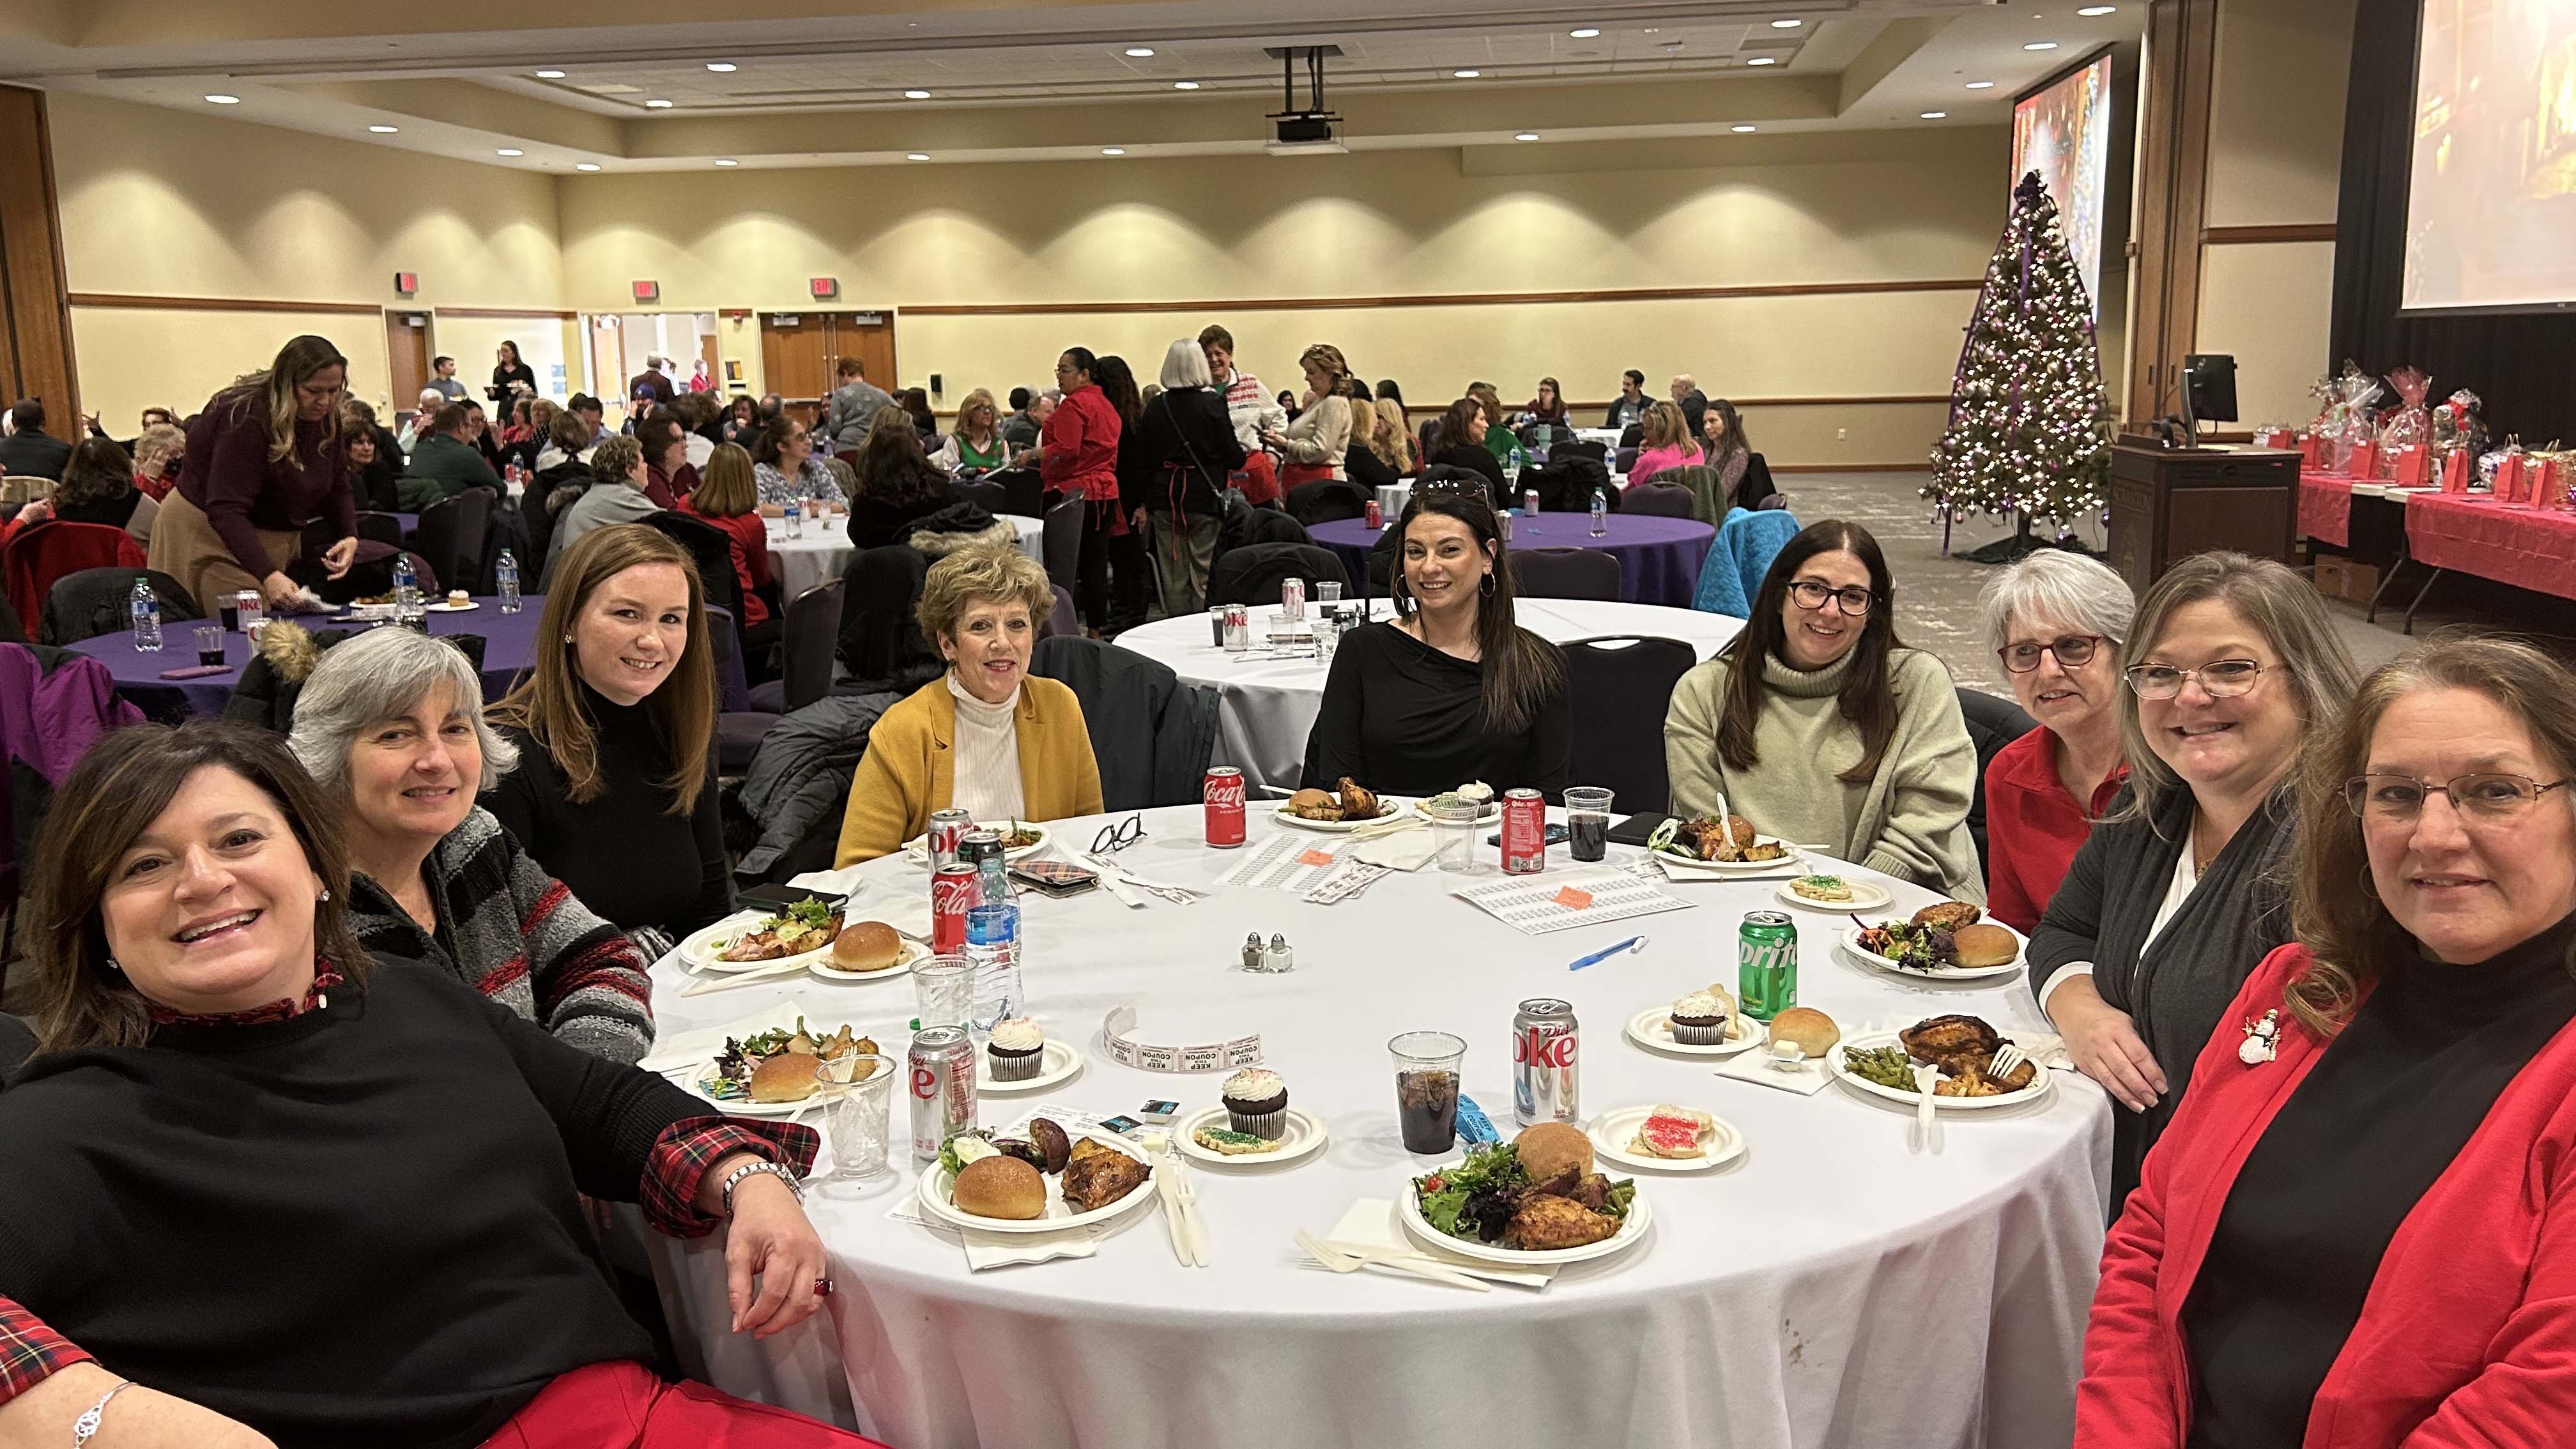 Shown, clockwise from left, are: Melinda Finnerty, Lori Flynn, Ellen Reagan, Sheila Strickland, Sandra Littzi, Aubree Armezzani, Geri Barber, Traci Vennie, and Lucy Grissinger. They were among the more than 350 who attended at the Staff Senate Christmas Luncheon hosted Wednesday, Dec. 14 in The McIlhenney Ballroom of The DeNaples Center. 